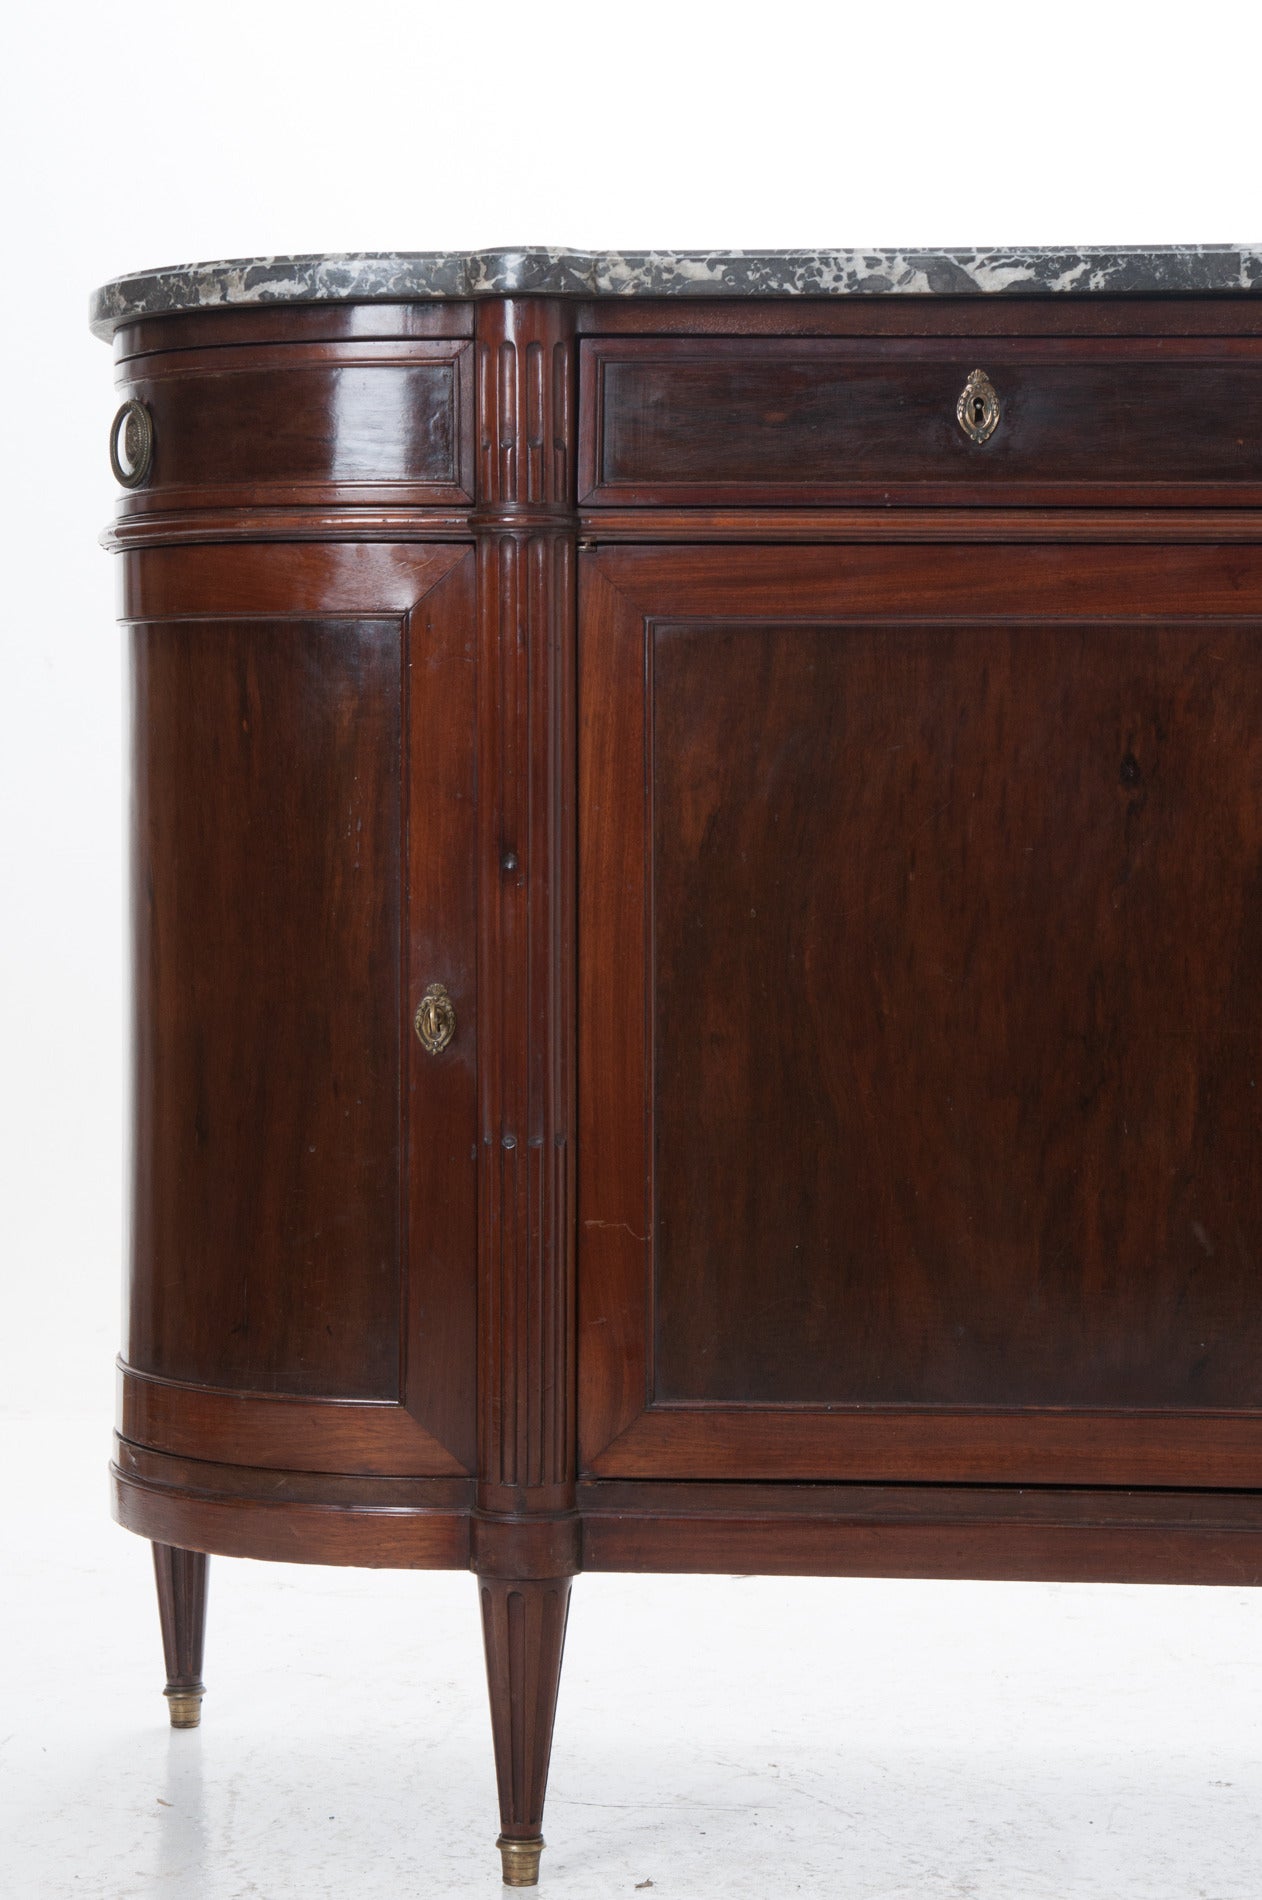 Elegant French Louis XVI demilune dark mahogany enfilade or buffet with its original shaped black marble top. Classic lined top center drawers with fluted legs, appear to begin just under the marble. Side drawers and doors curve to open, the whole